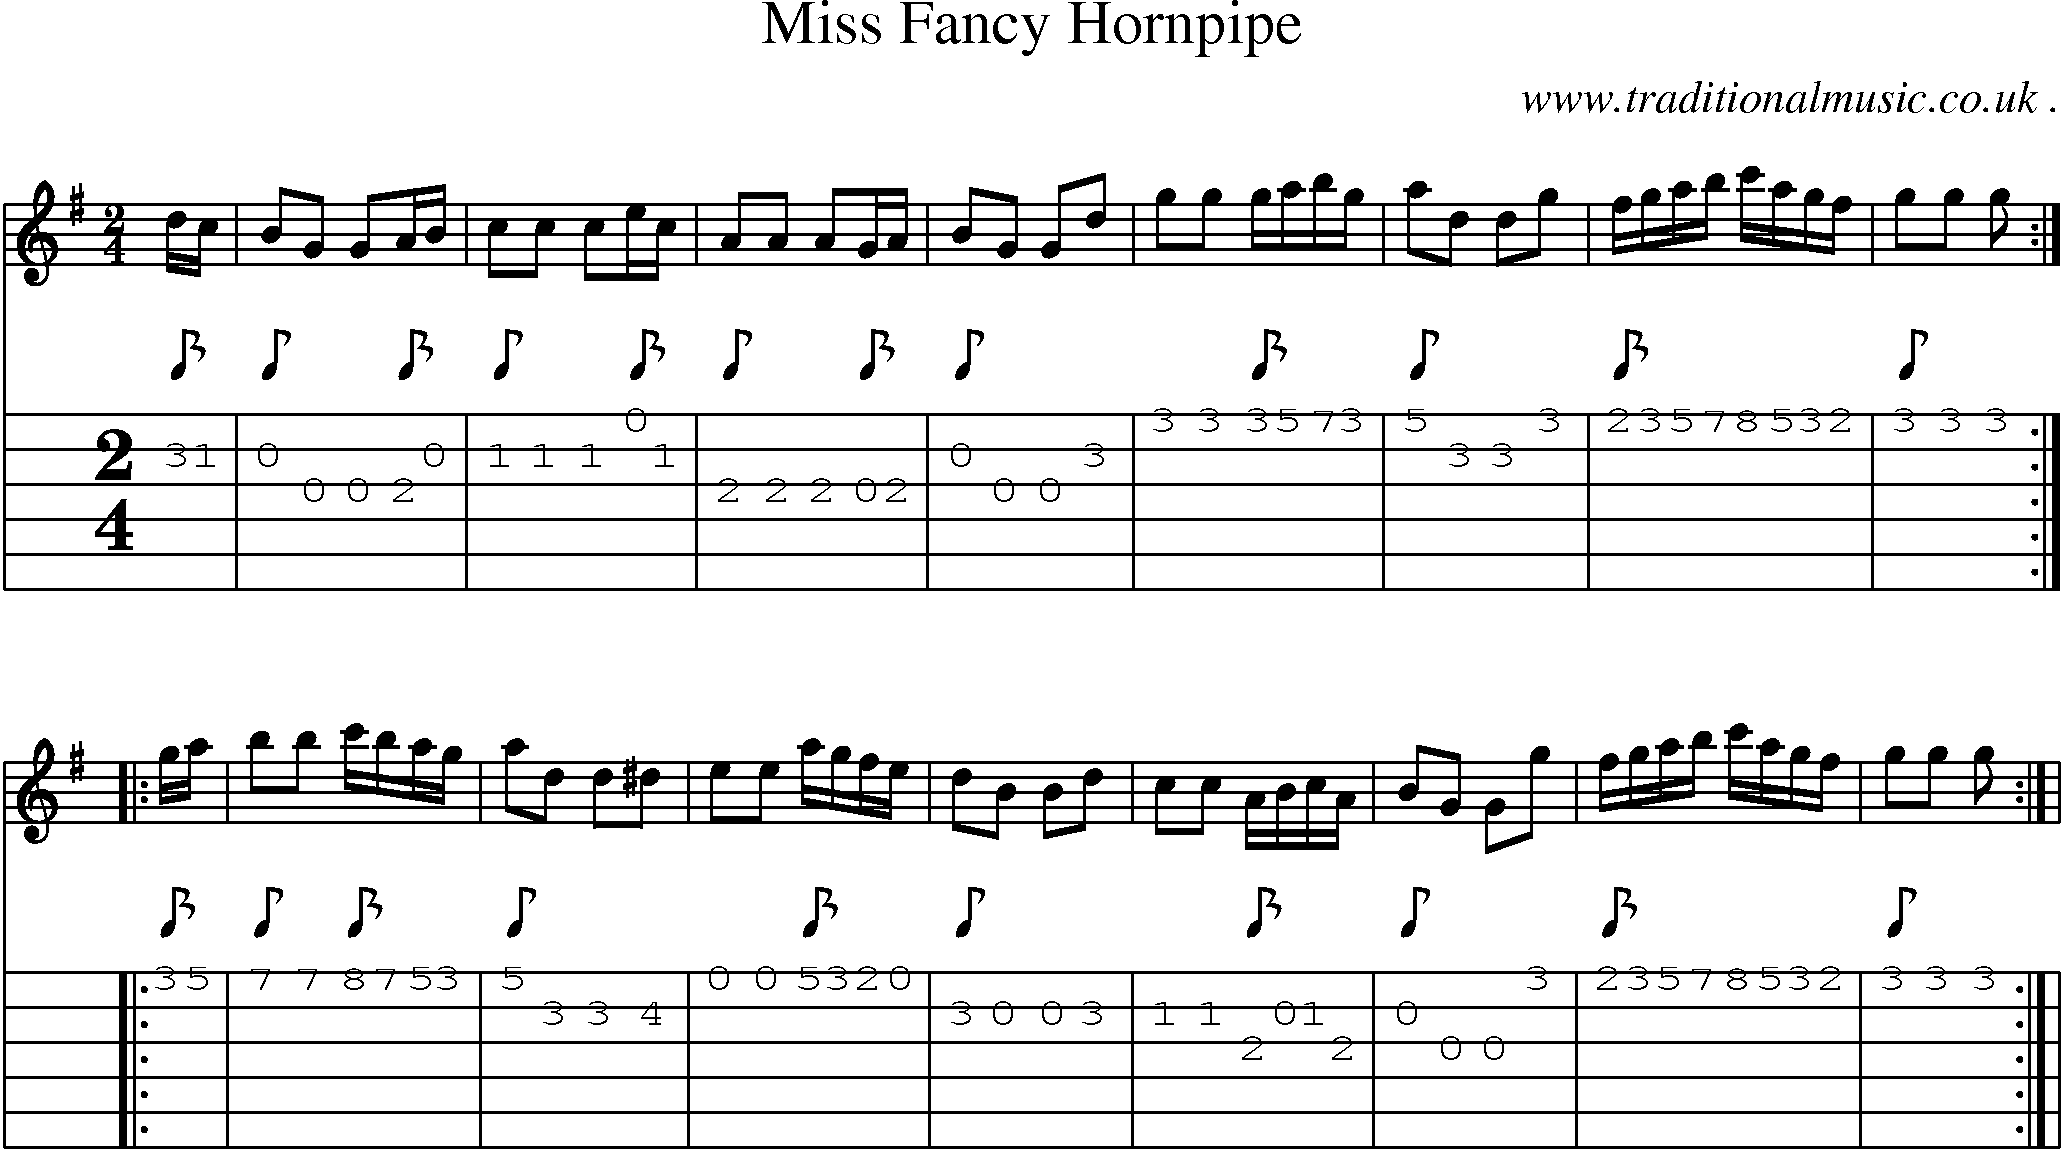 Sheet-Music and Guitar Tabs for Miss Fancy Hornpipe